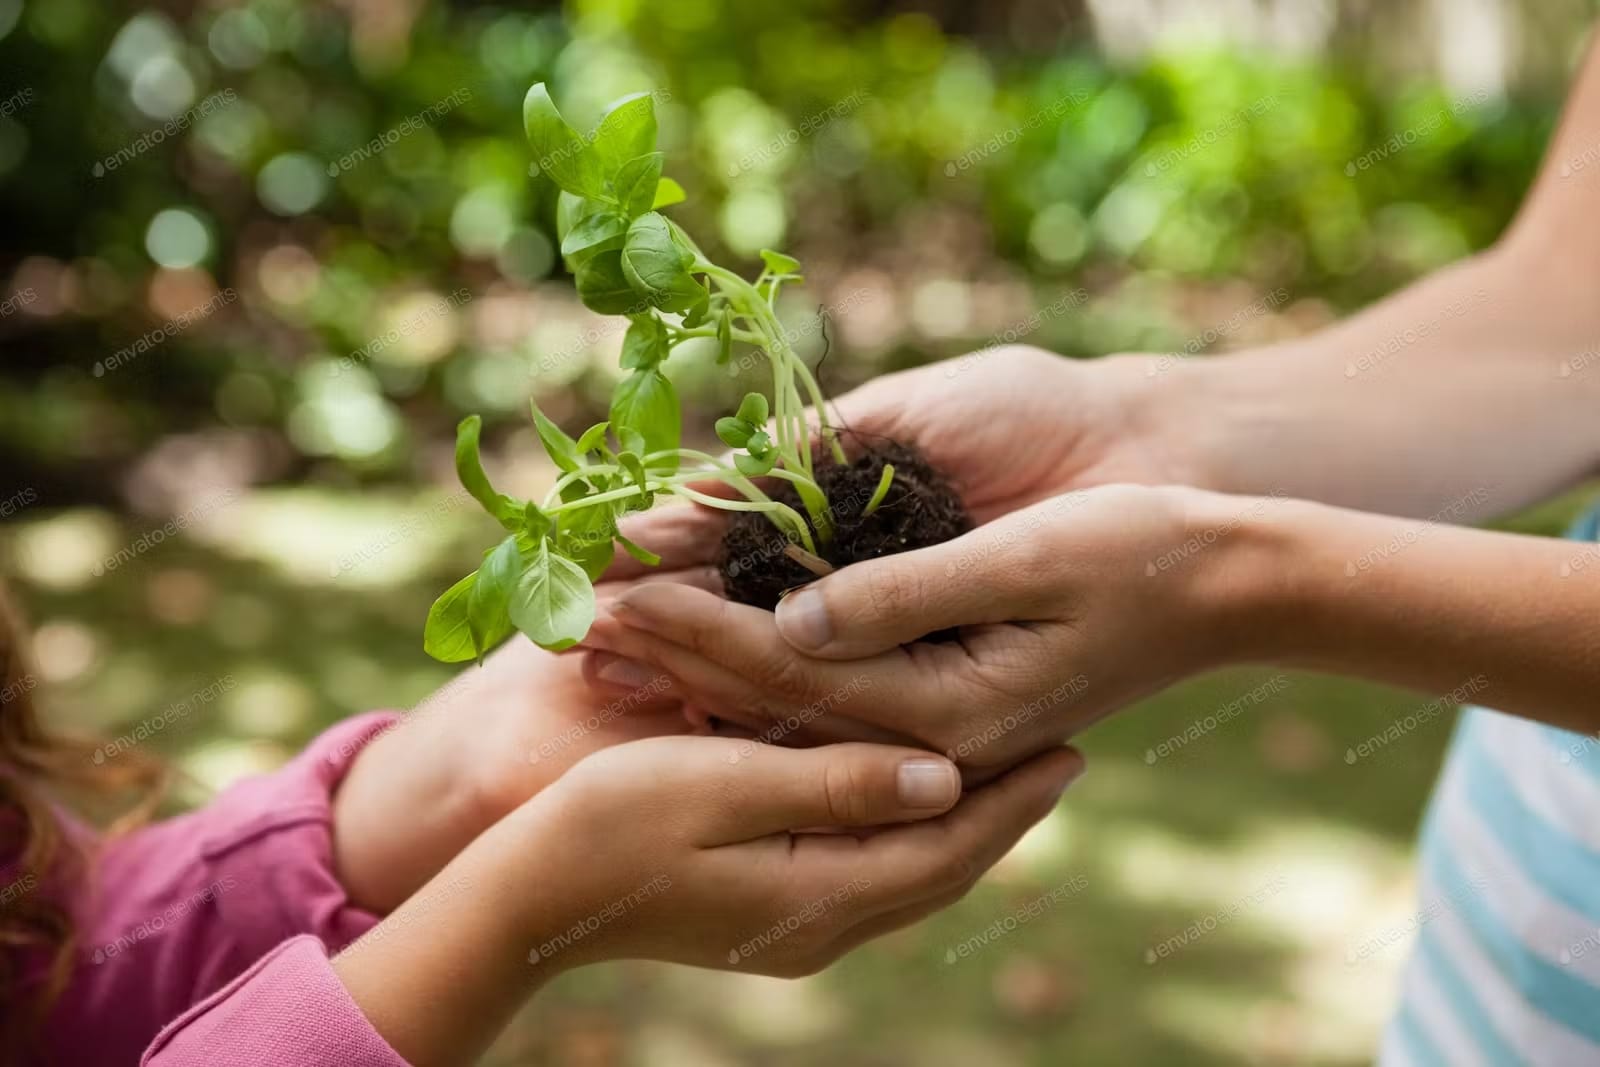 Image of a parent’s hands holding the earth and placing it to their child’s outstretched hands on a green grassy background.